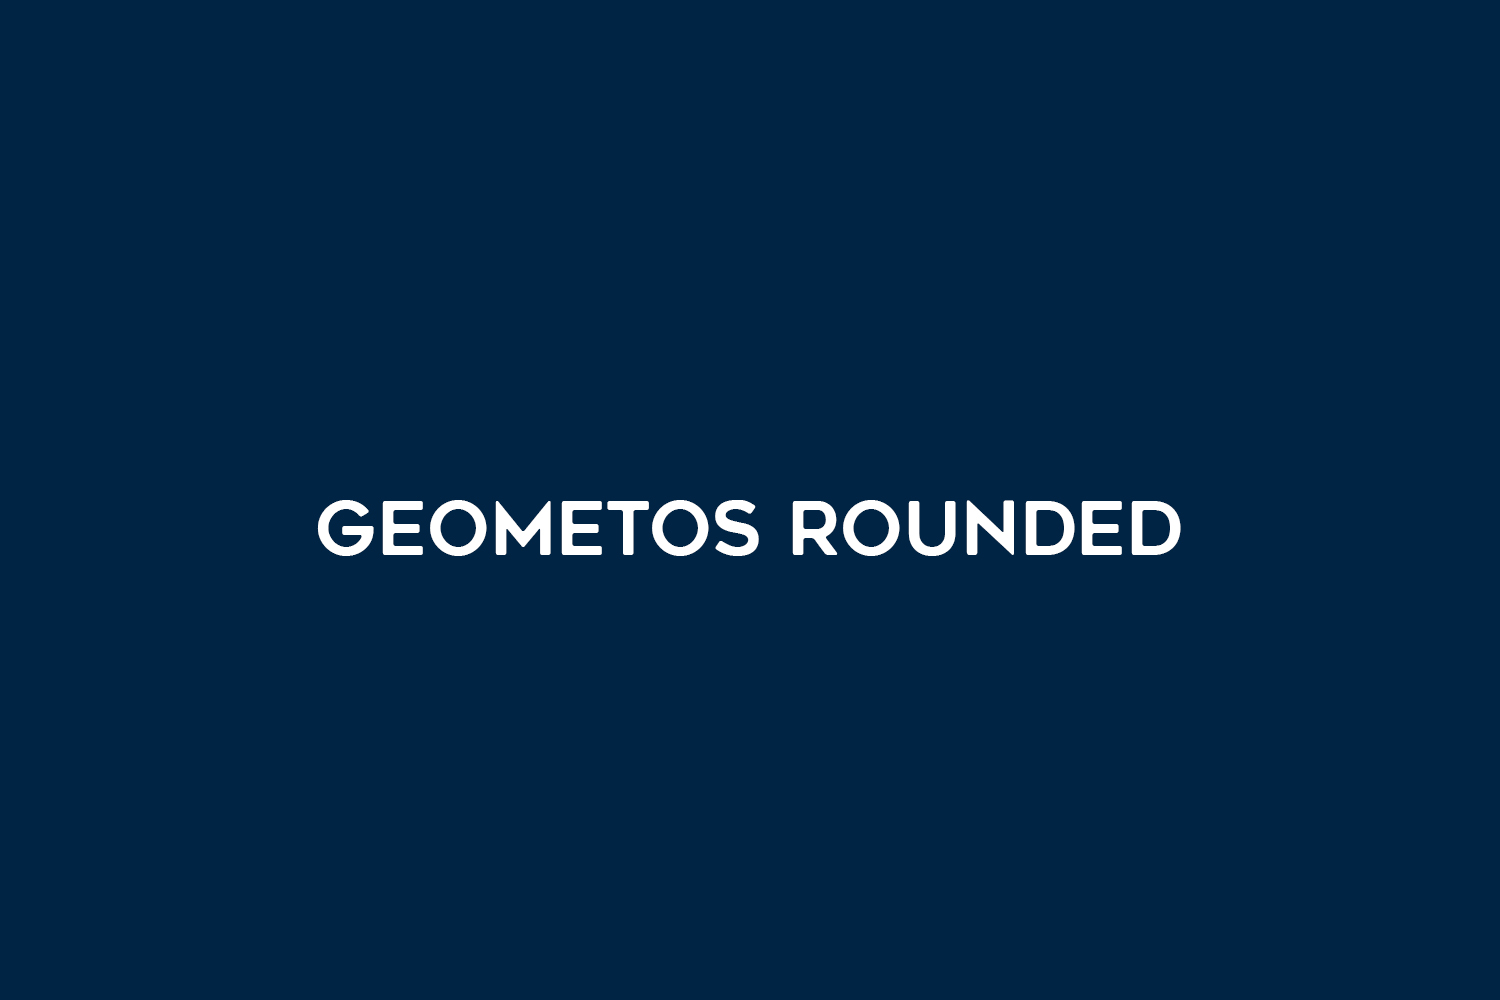 Geometos Rounded Free Font